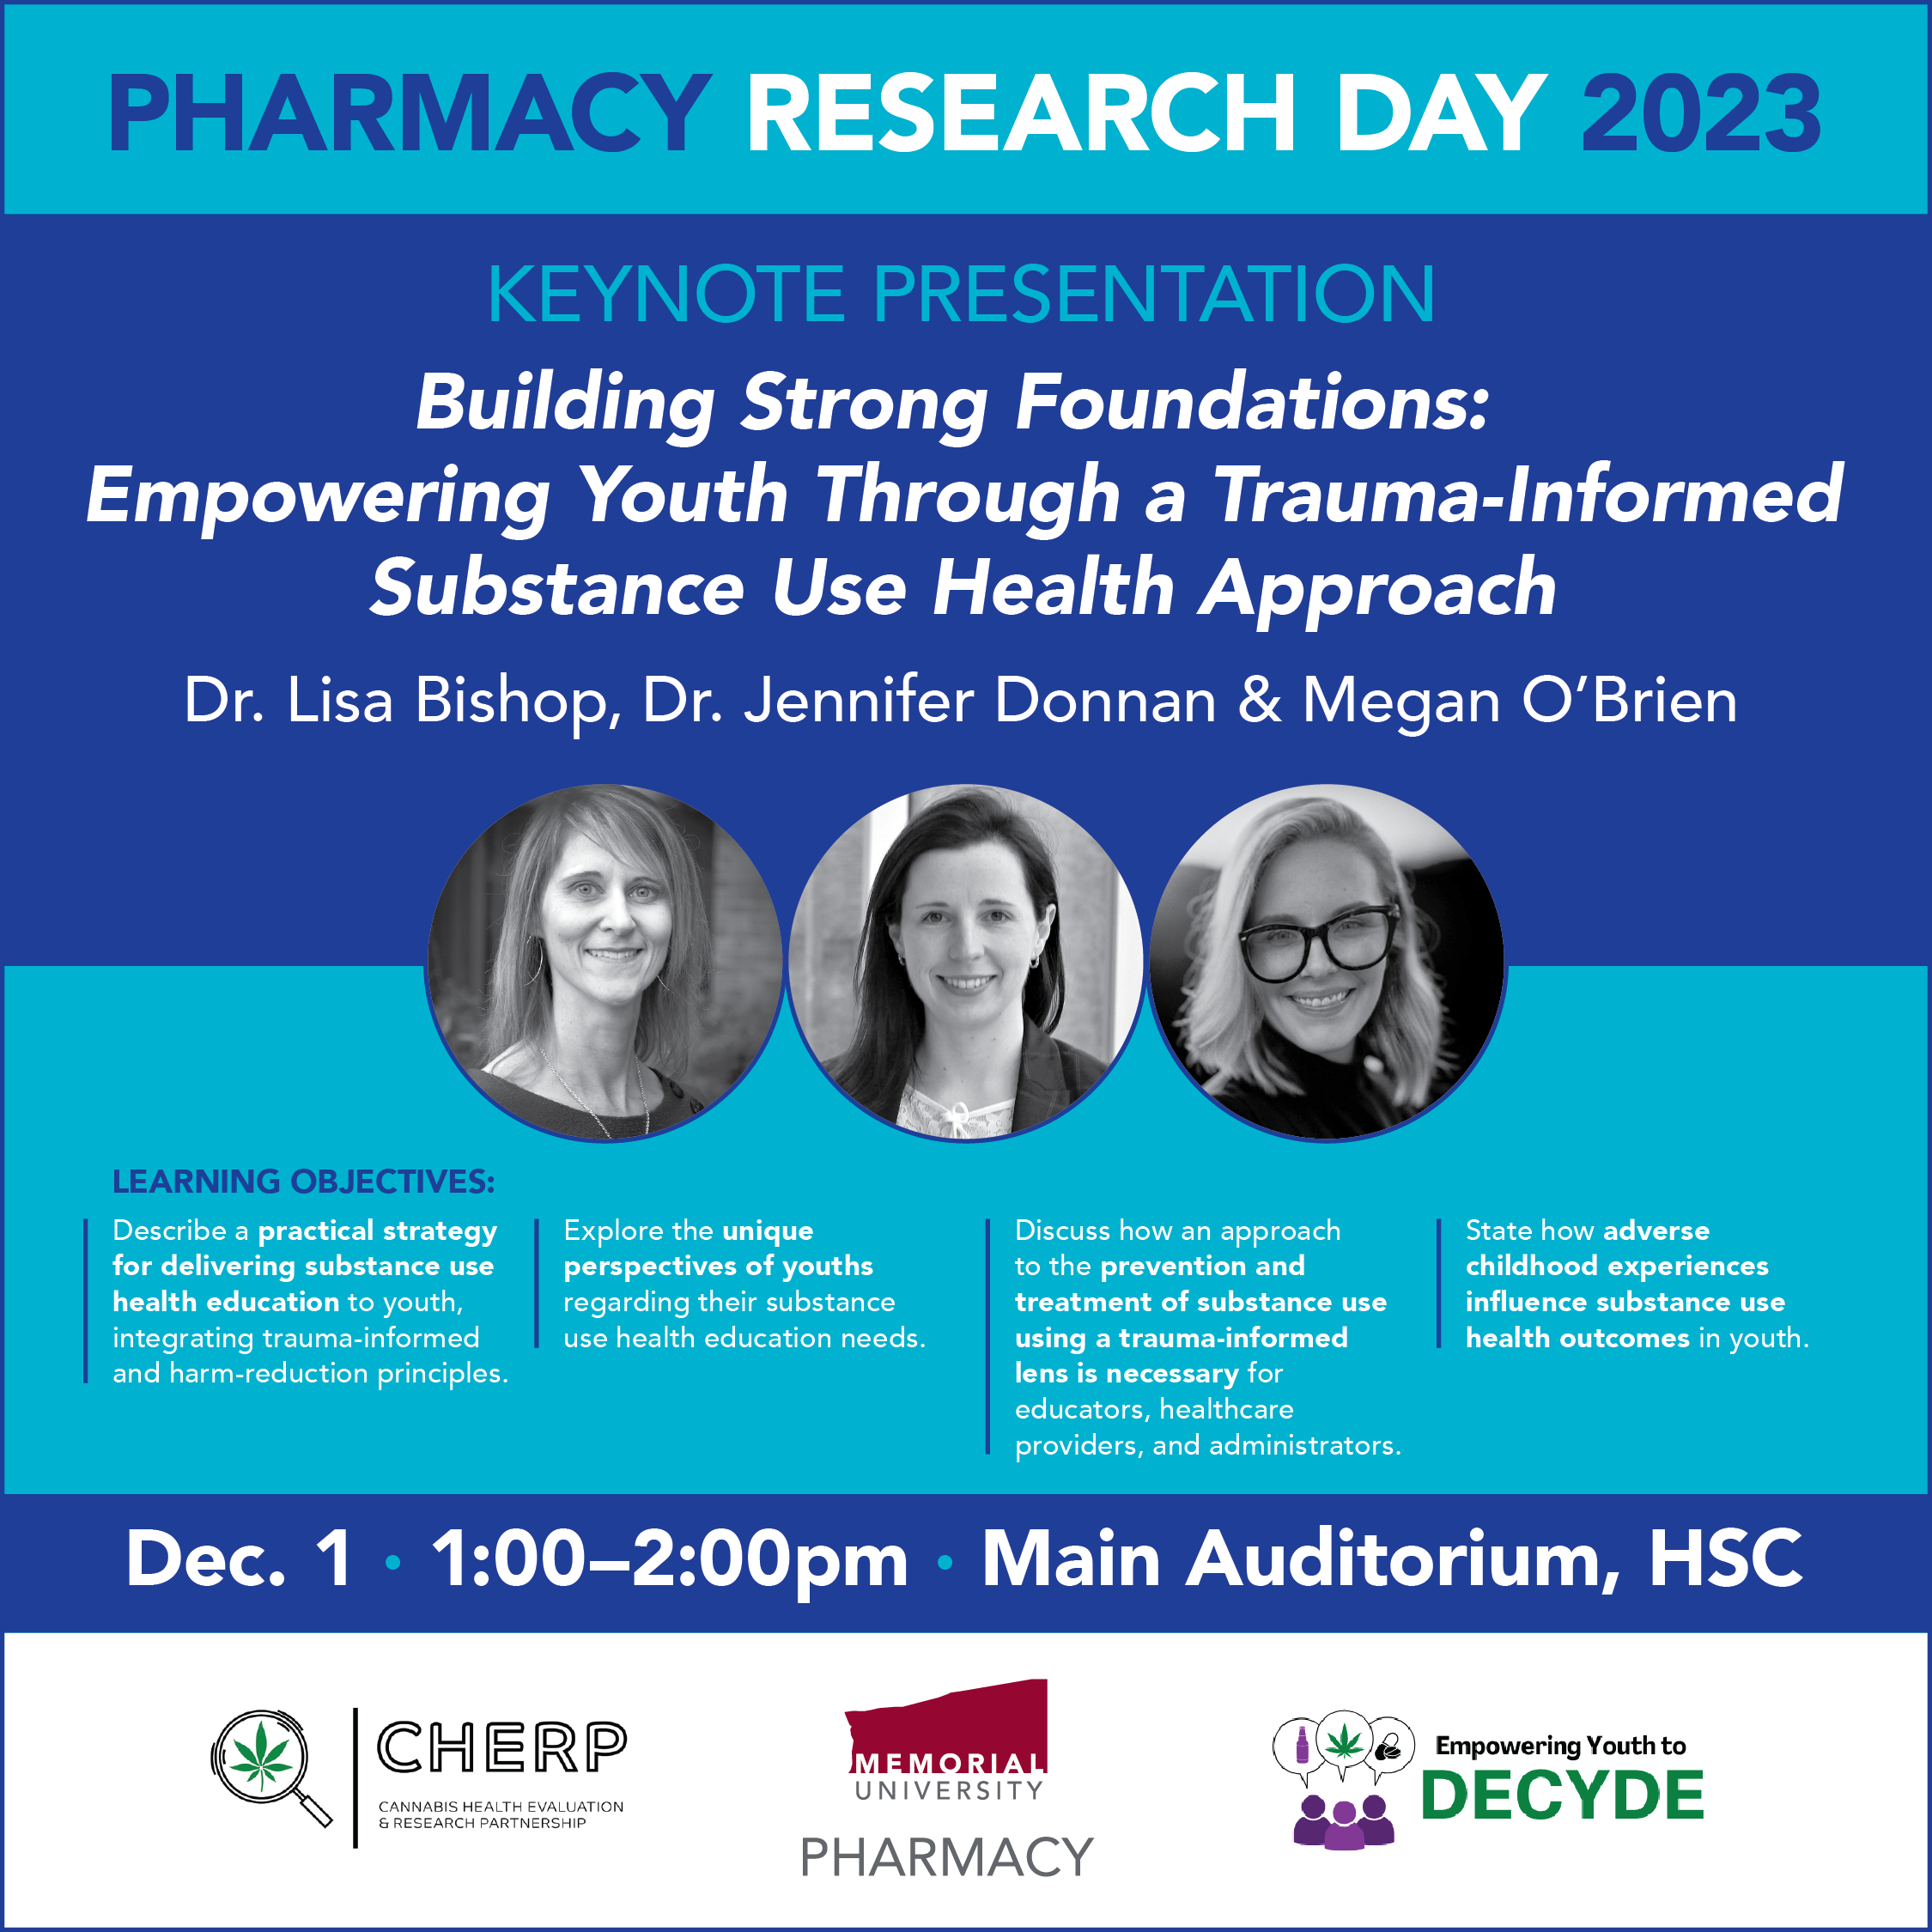 Pharmacy Research Day - Keynote Presentation by Dr. Lisa Bishop, Dr. Jennifer Donnan and Megan O'Brien. The title of their presentation is Building Strong Foundations: Empowering Youth through a Trauma-Informed Substance Use Health Approach